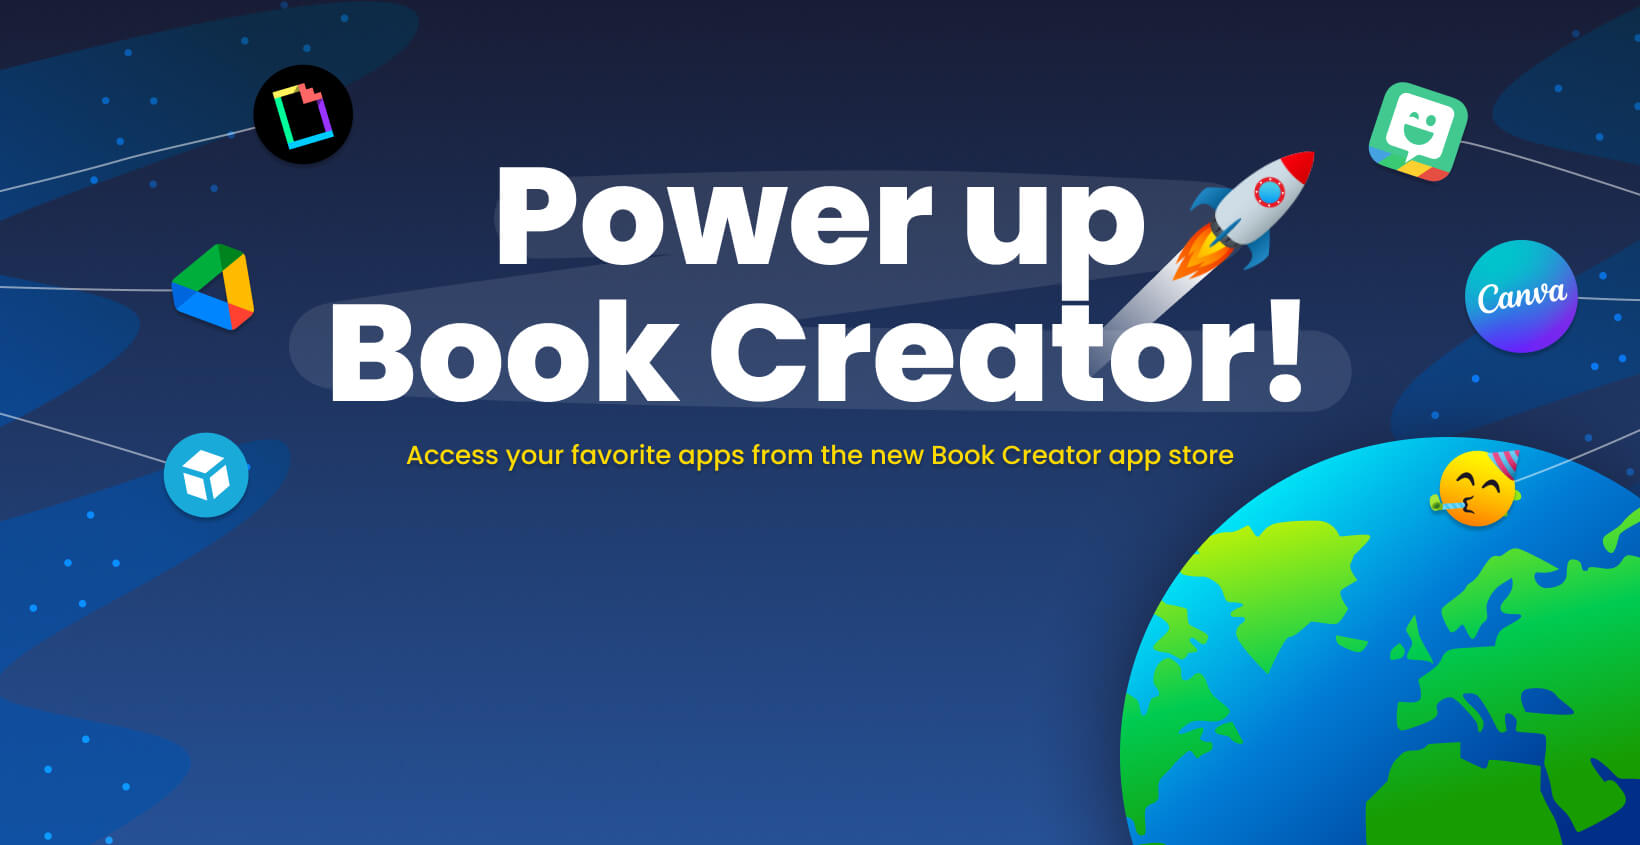 Featured image for “Power up your Book Creator experience with the new App Store”